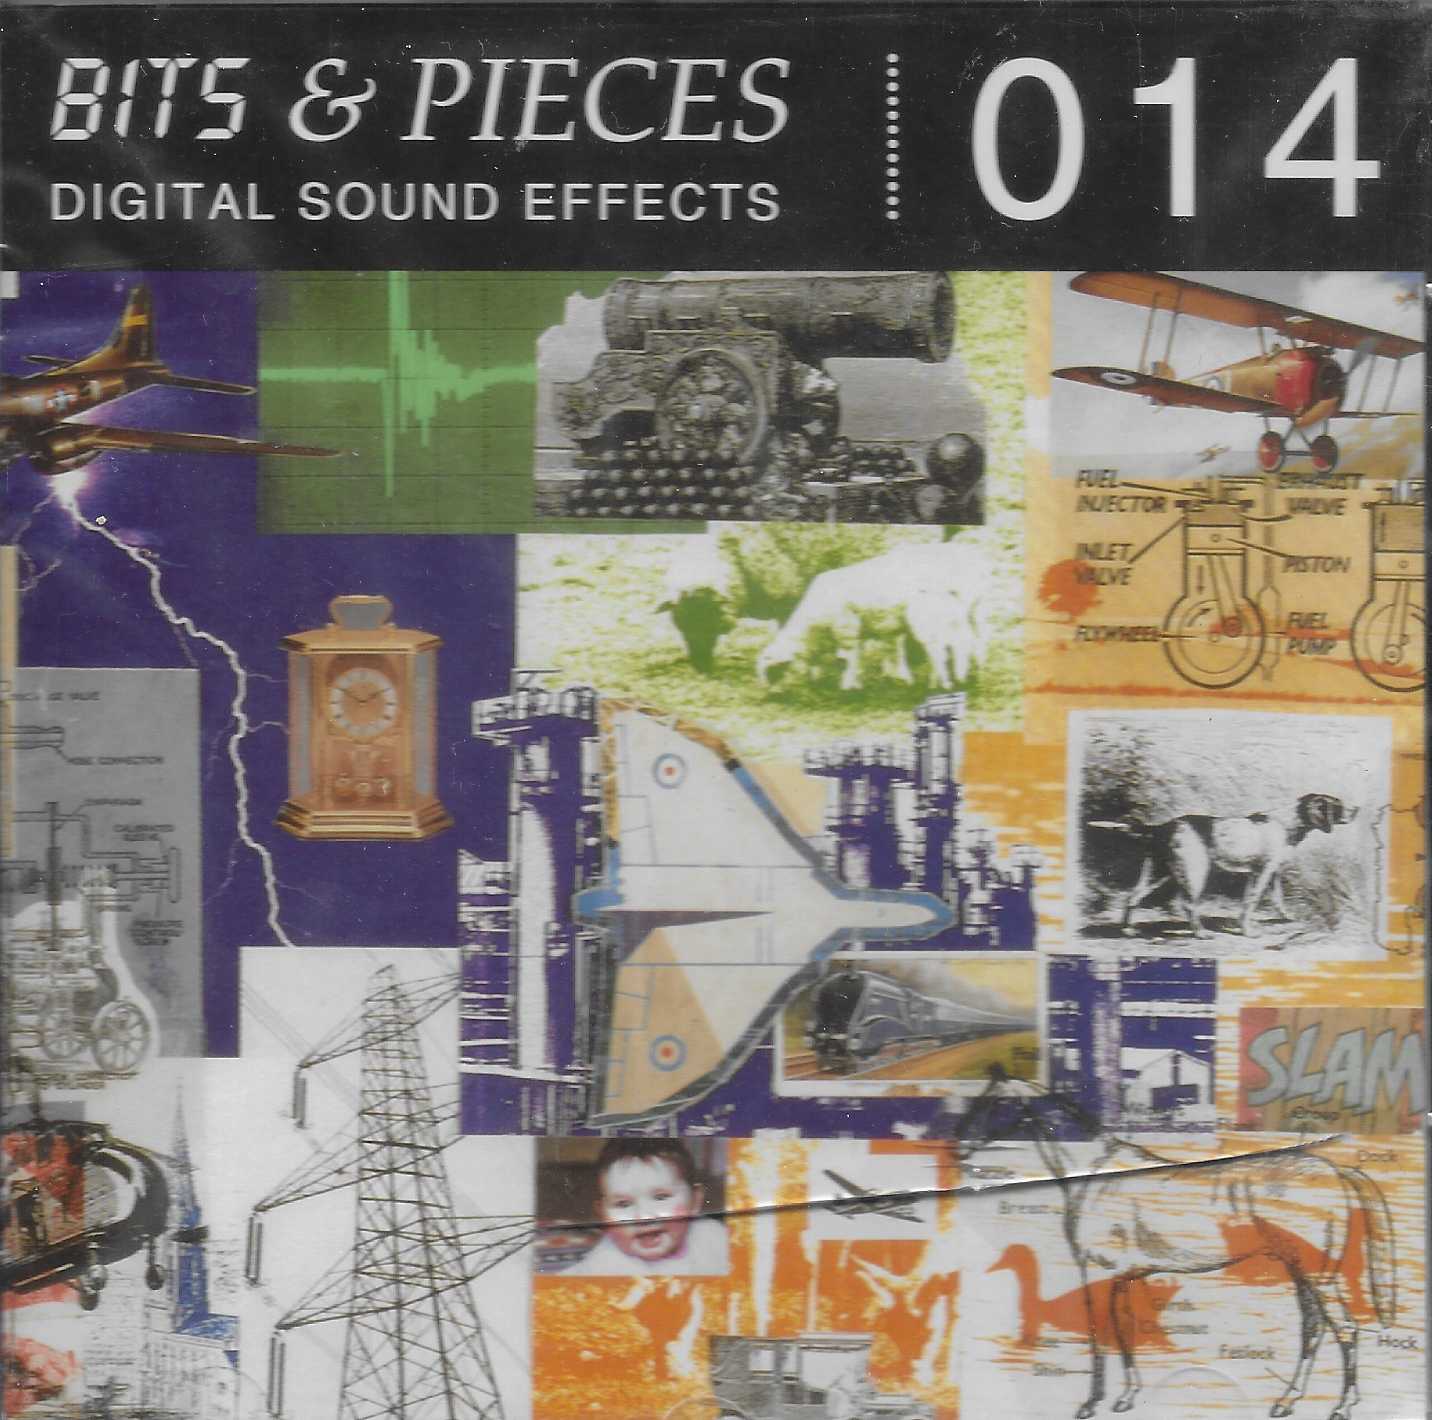 Picture of Bits & pieces digital sound effects 014 by artist Various from ITV, Channel 4 and Channel 5 cds library